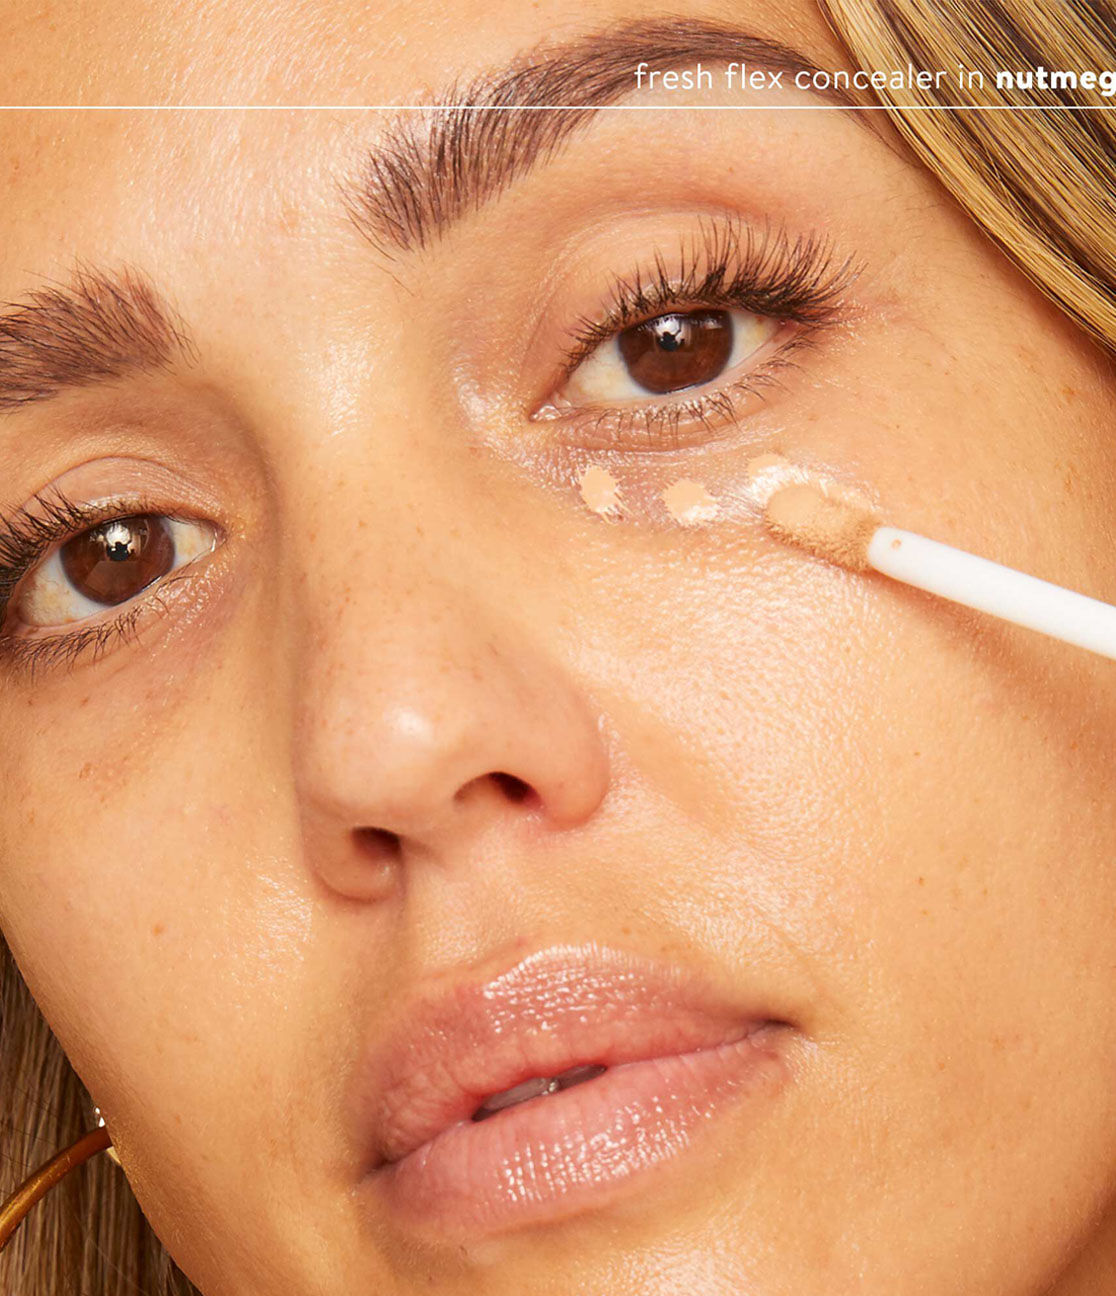 How To Apply Concealer To Amplify Your Features